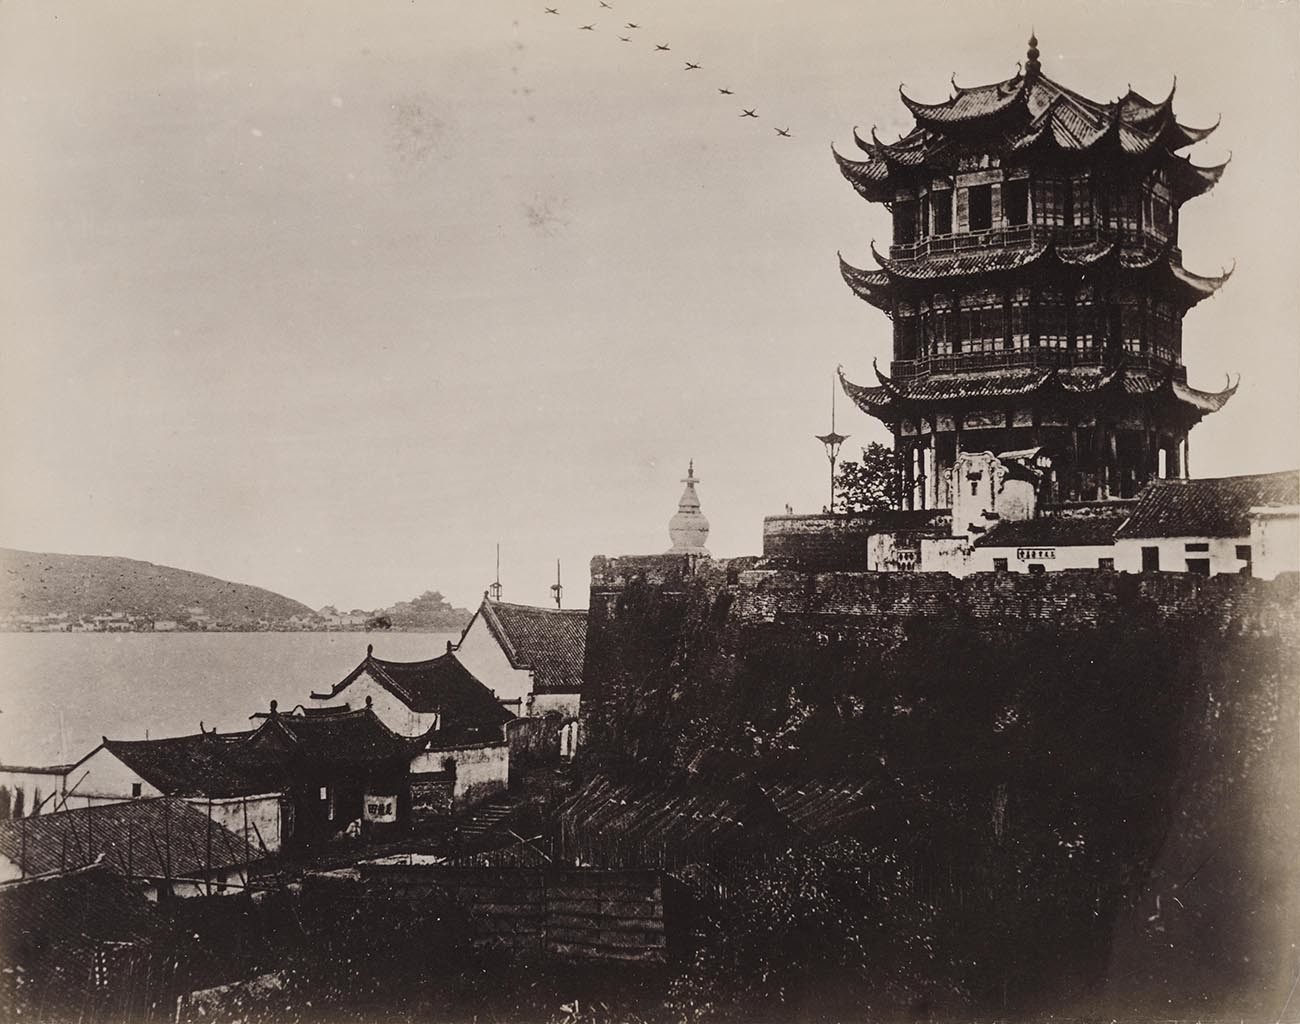  -  - Seizing Shadows: Rare Photographs by late Qing Dynasty Masters